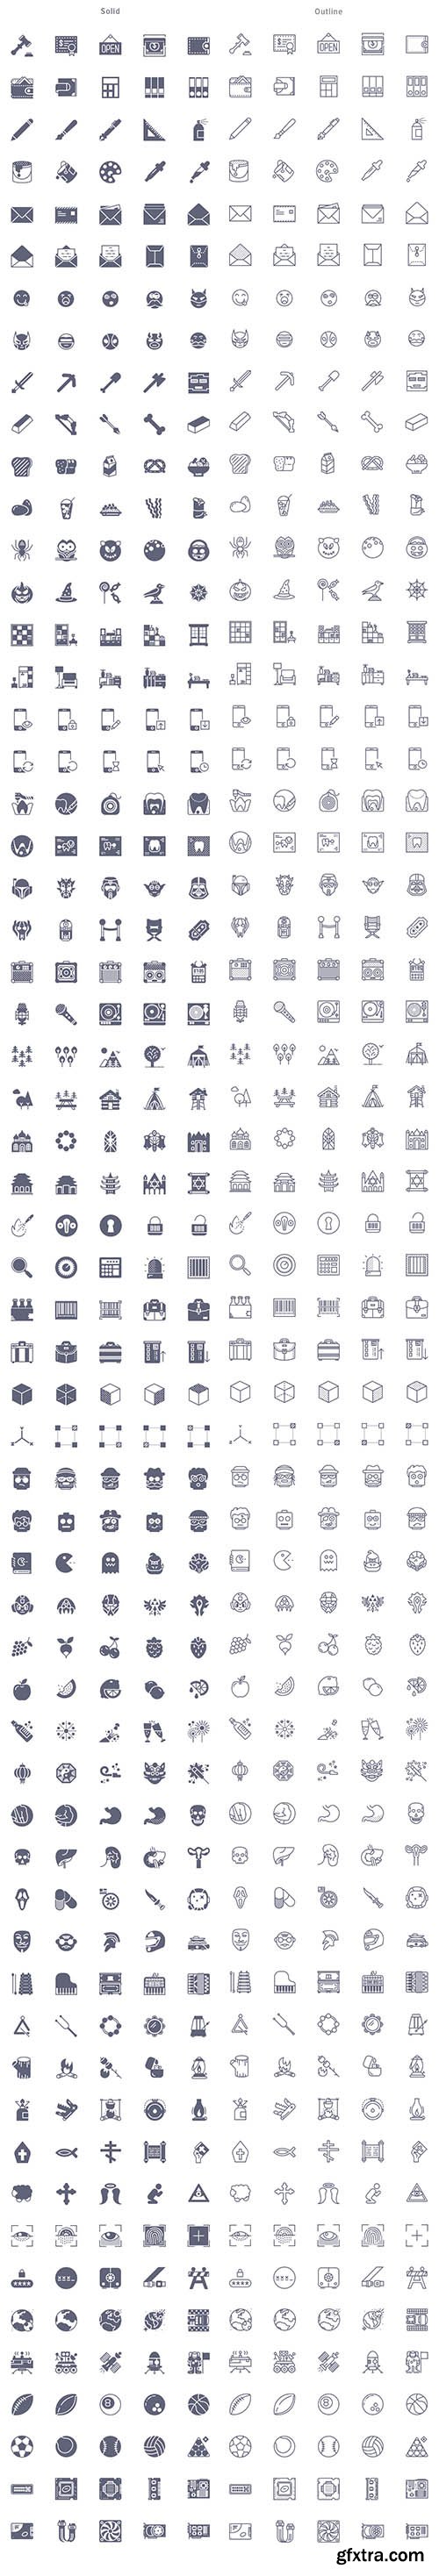 AI, PSD, SCETCH Vector Icons - 300 Smashicons